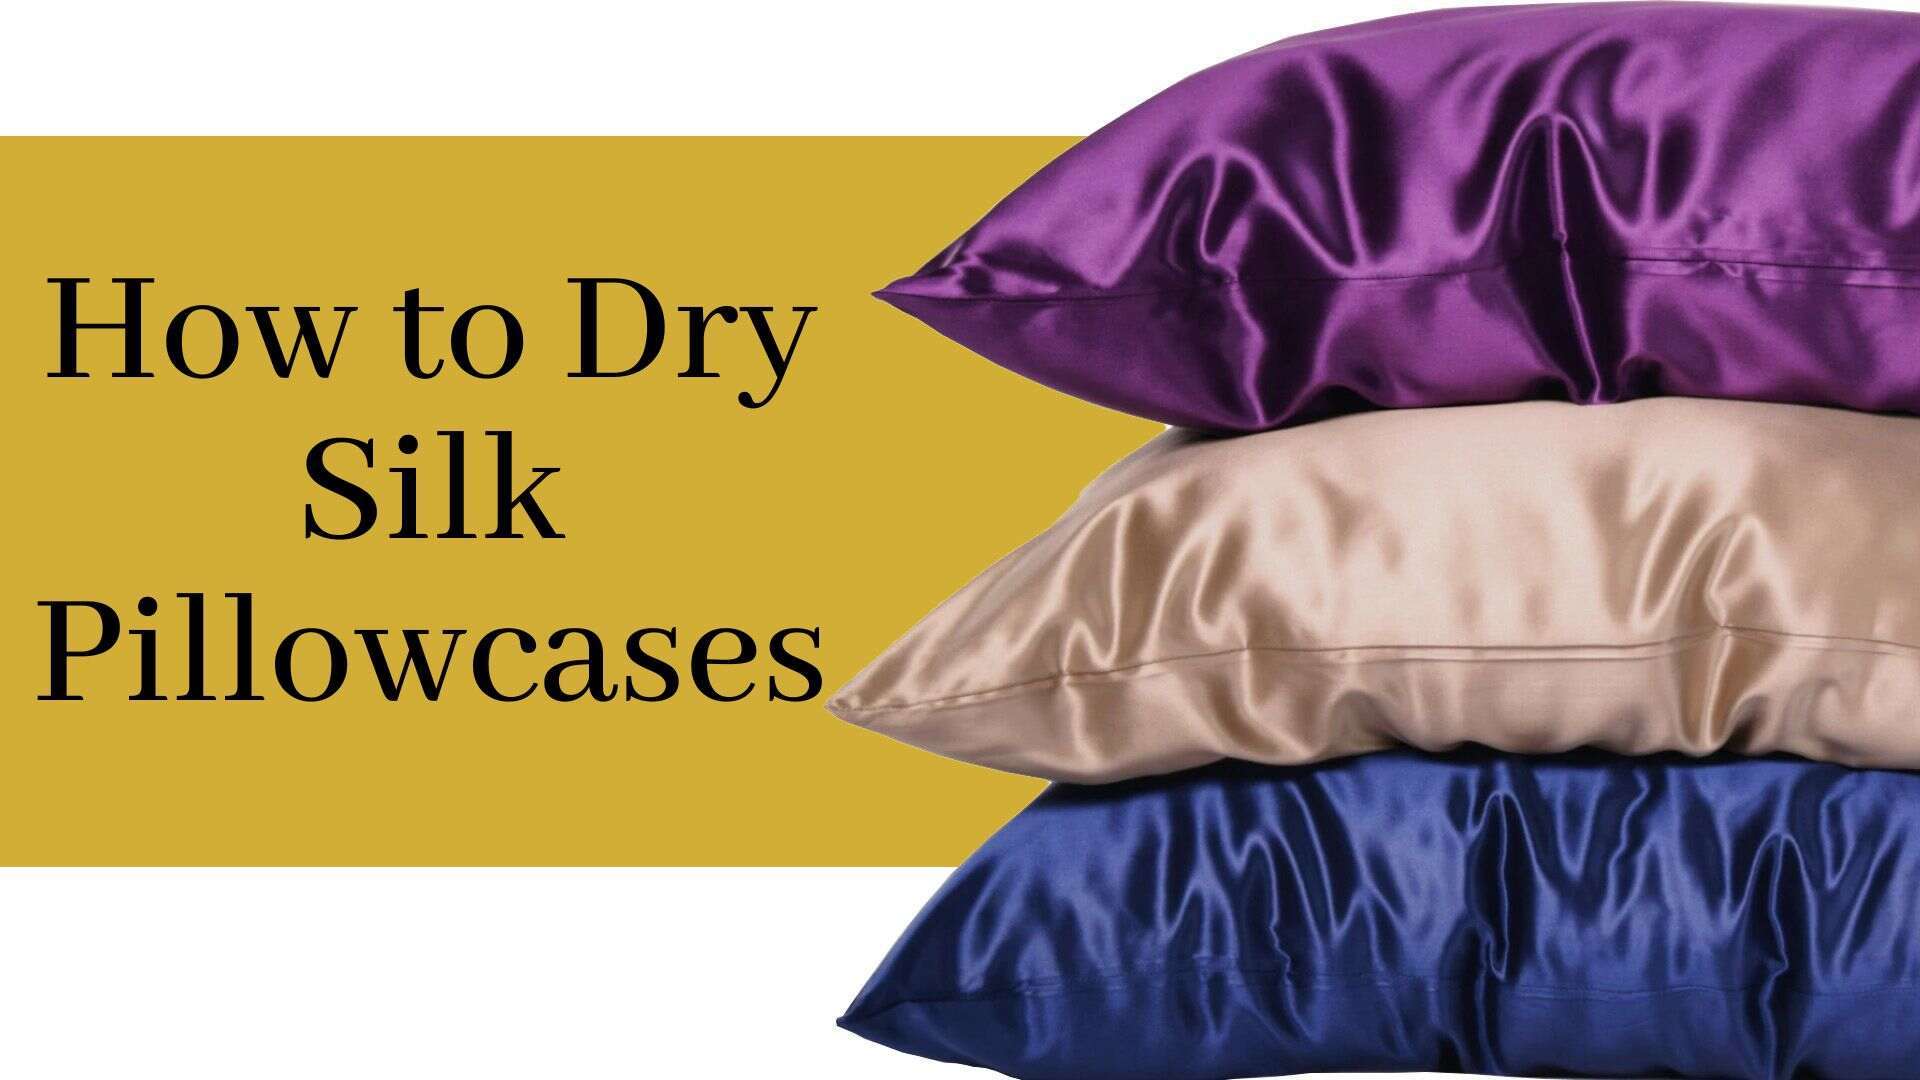 how to dry silk pillowcases header image